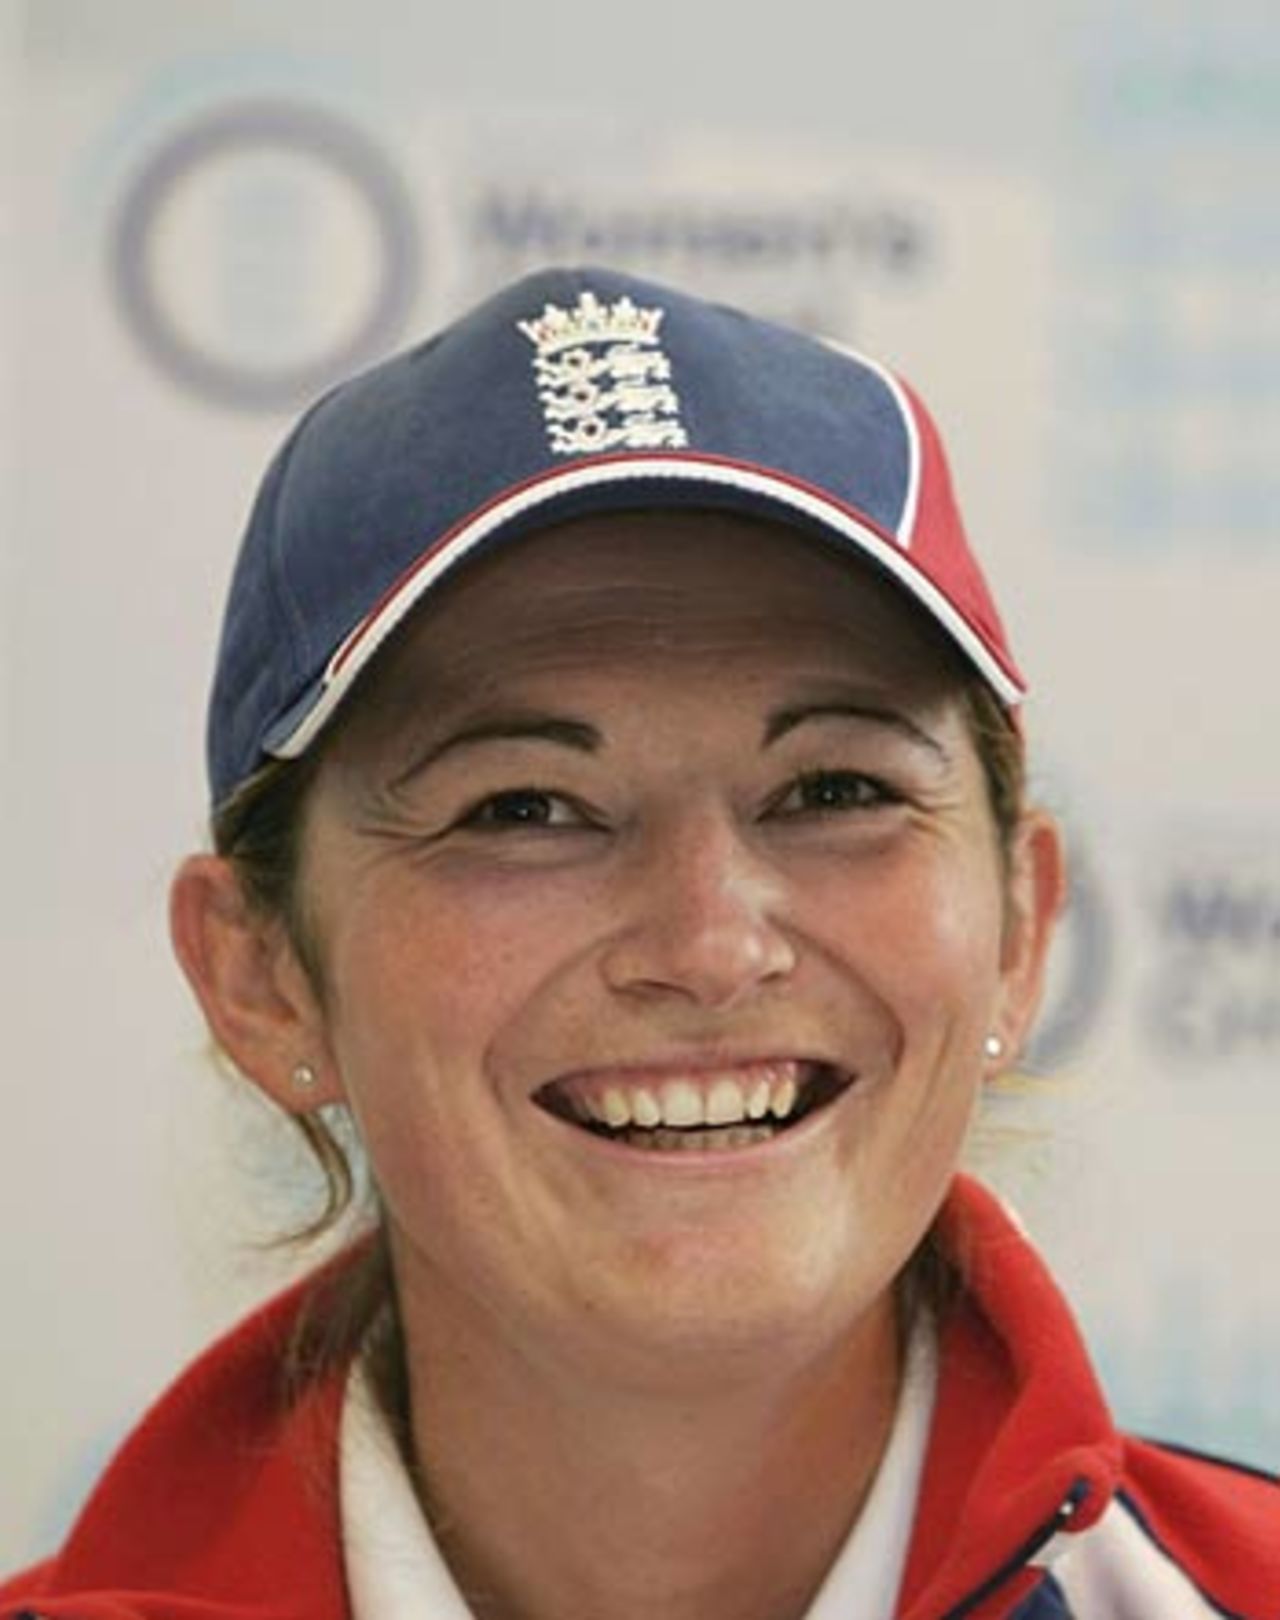 Charlotte Edwards speaks at the launch of Taunton as the "Home of Women's Cricket", Taunton, August 29, 2006